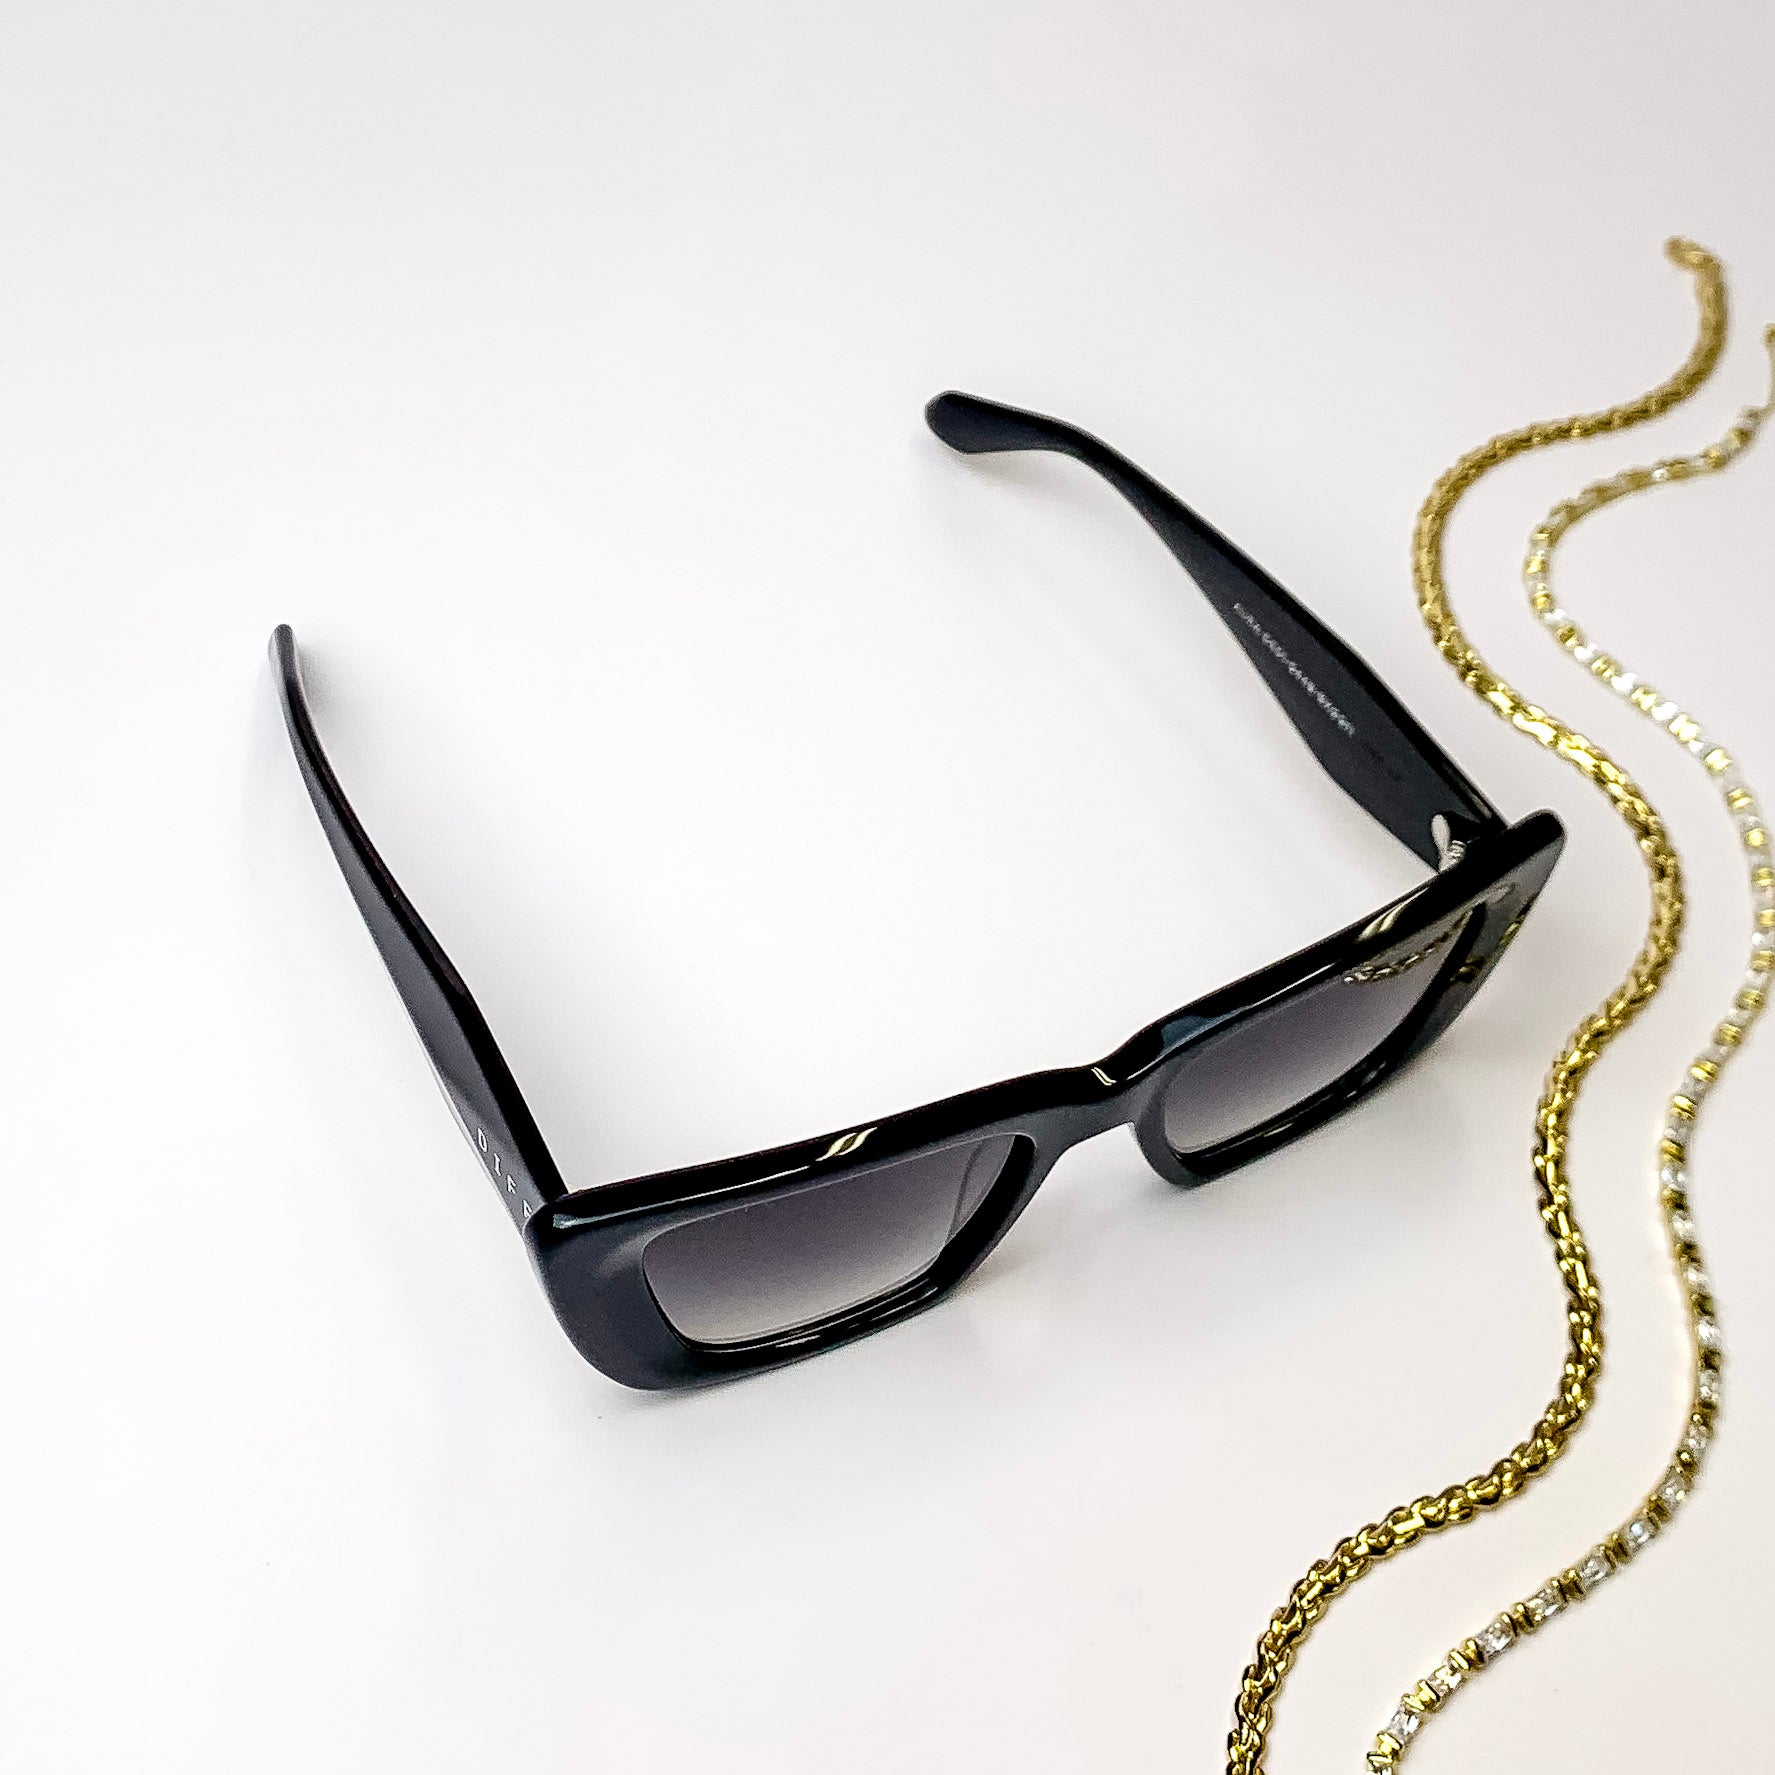 DIFF | Aura Square Cat Eye Sunglasses in Black Grey Gradient - Giddy Up Glamour Boutique